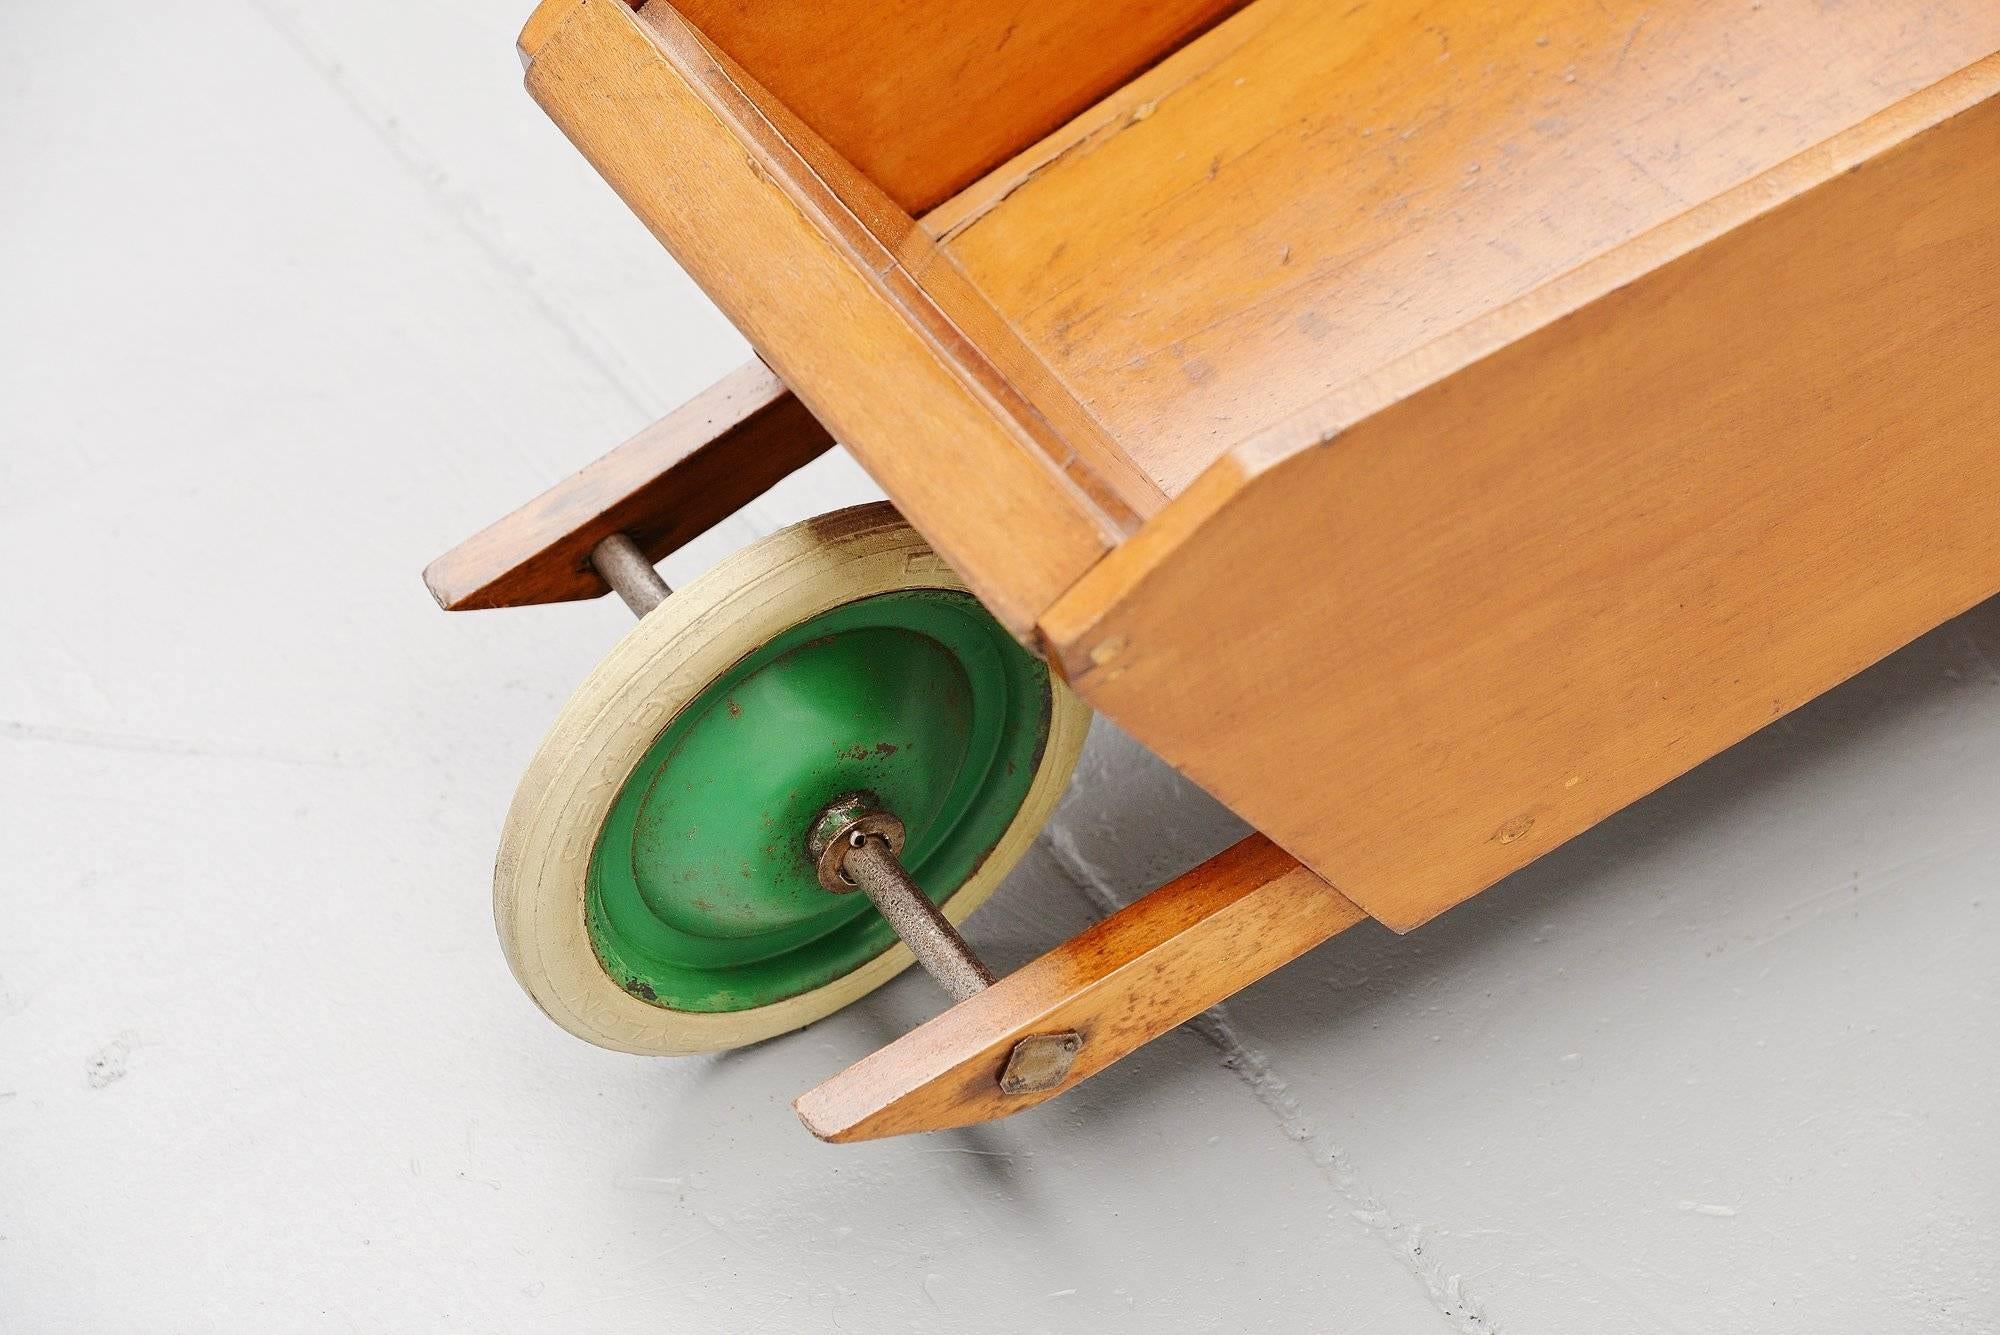 Rare wheelbarrow designed by Ko Verzuu for Ado in ca 1950. Ado means Arbeid door onvolwaardigen, translated; labor by incapacitated, which makes this an even more special piece. Toys by Ado are being highly collected at the moment, even more than